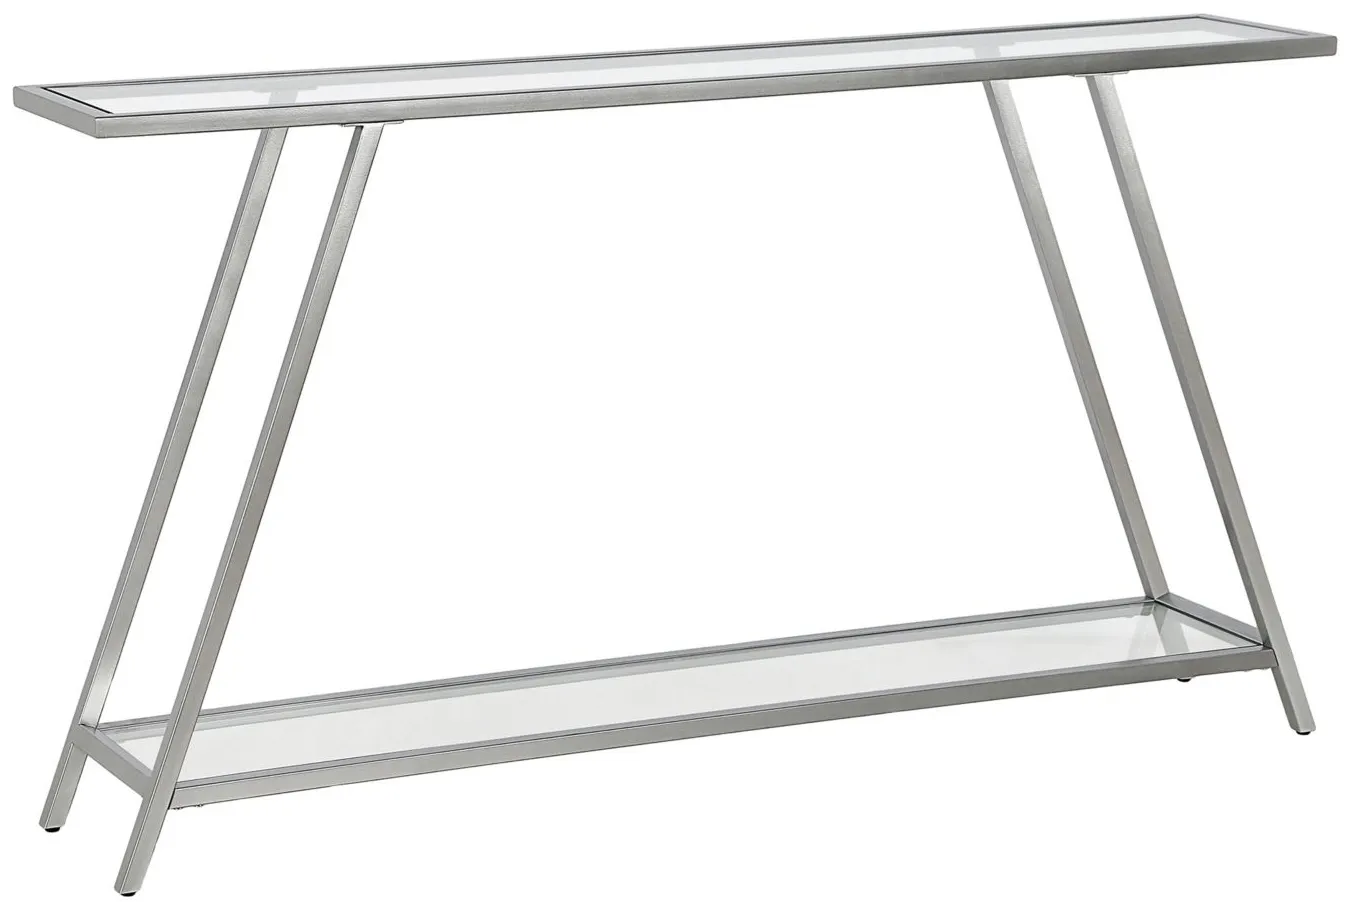 Lunel Rectangular Sofa Table in Silver by Hudson & Canal